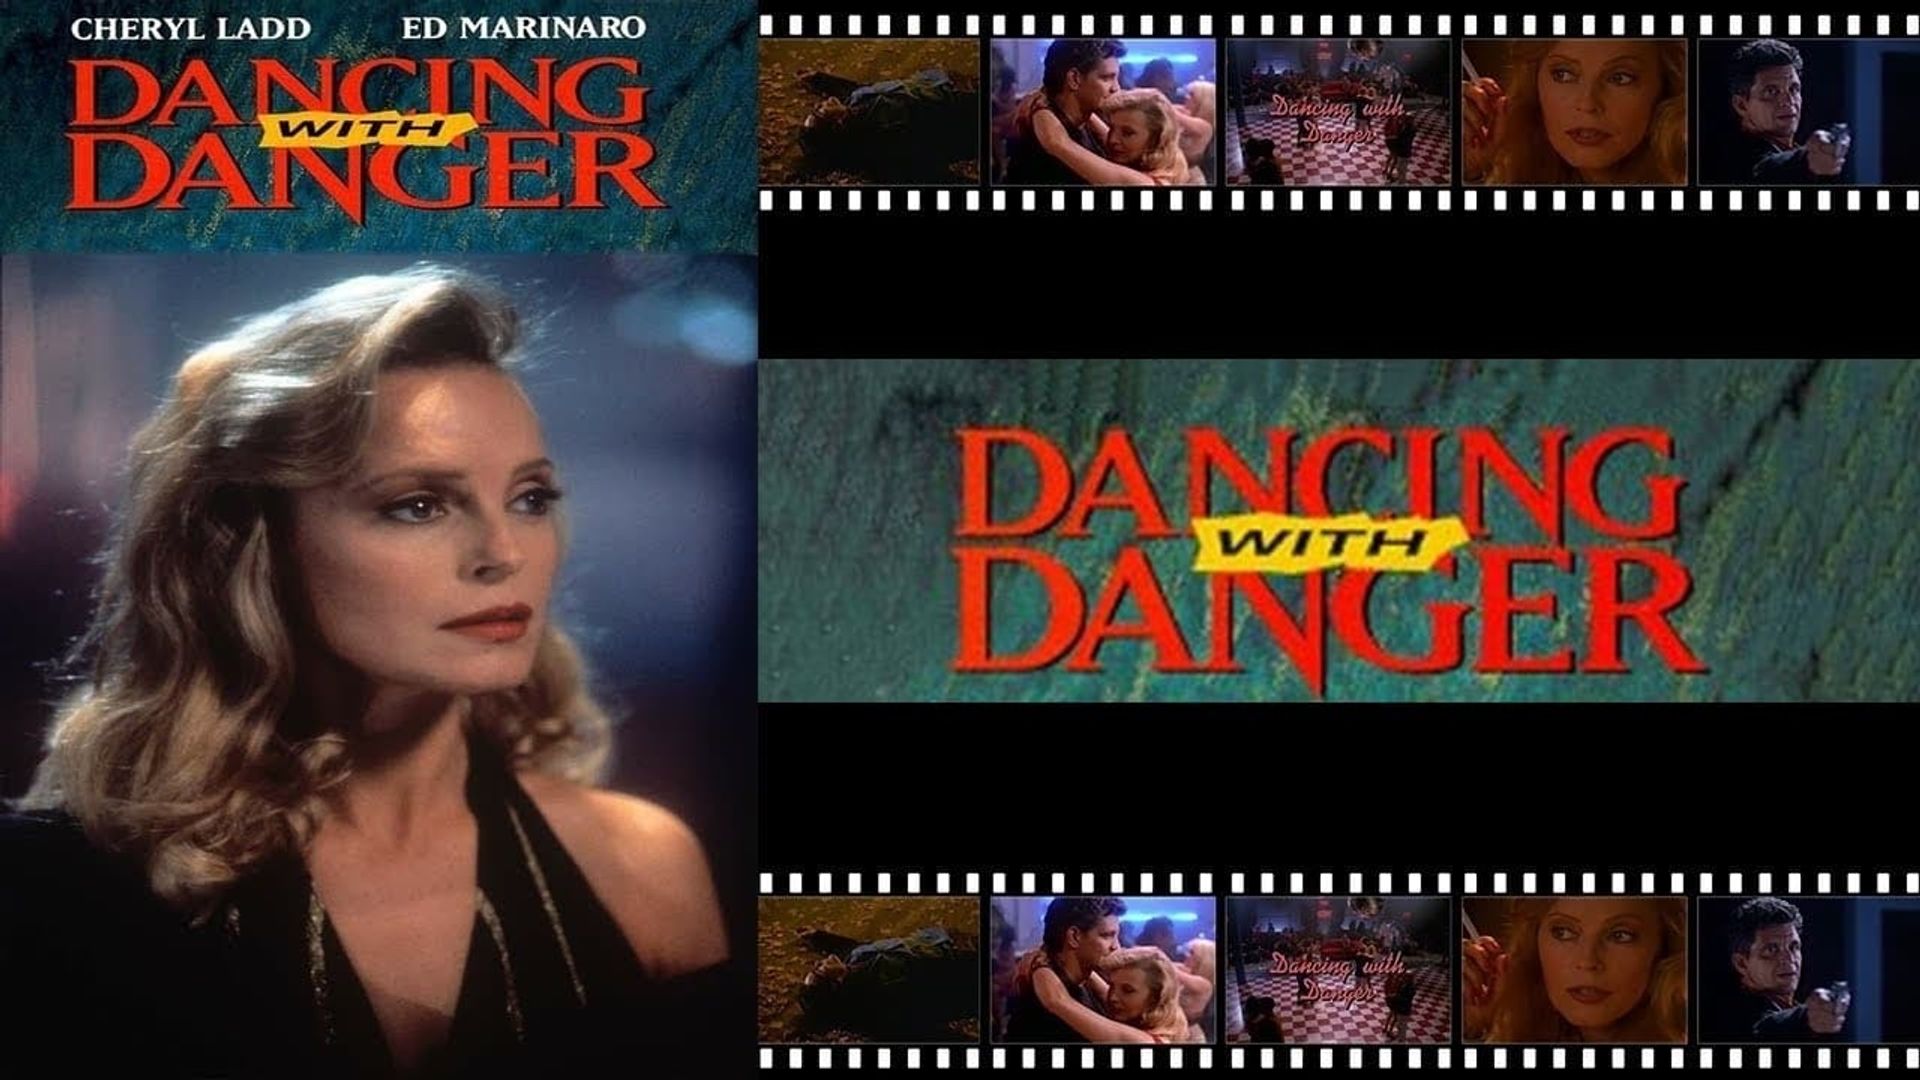 Dancing with Danger background